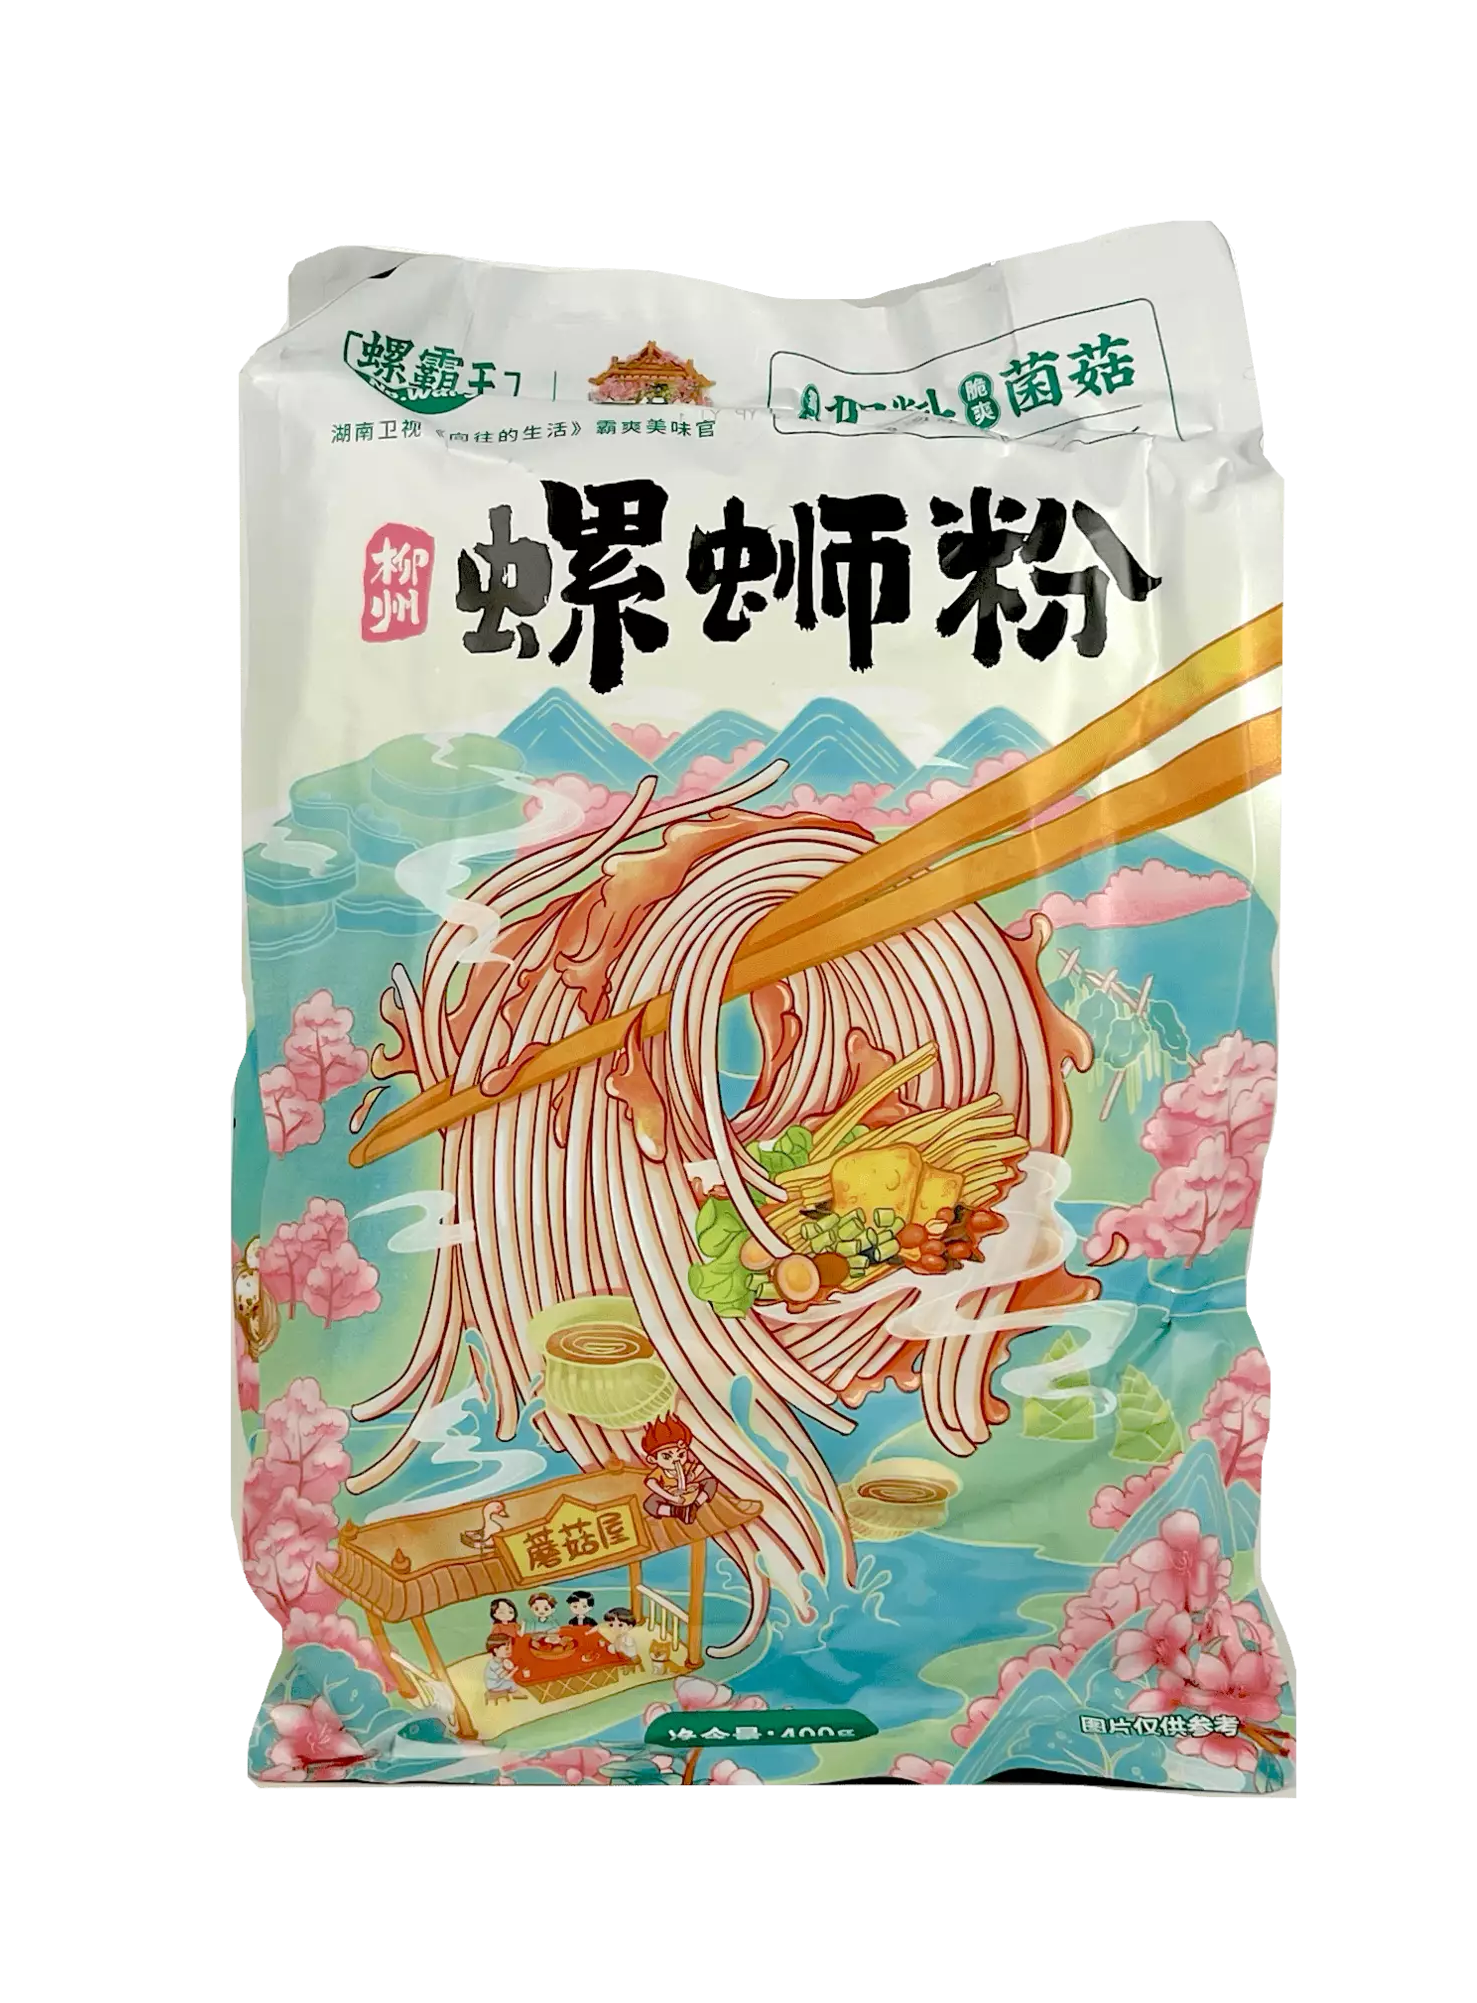 Instant Noodles-Mushroom Flavour 400g Luo Ba Wang Cina